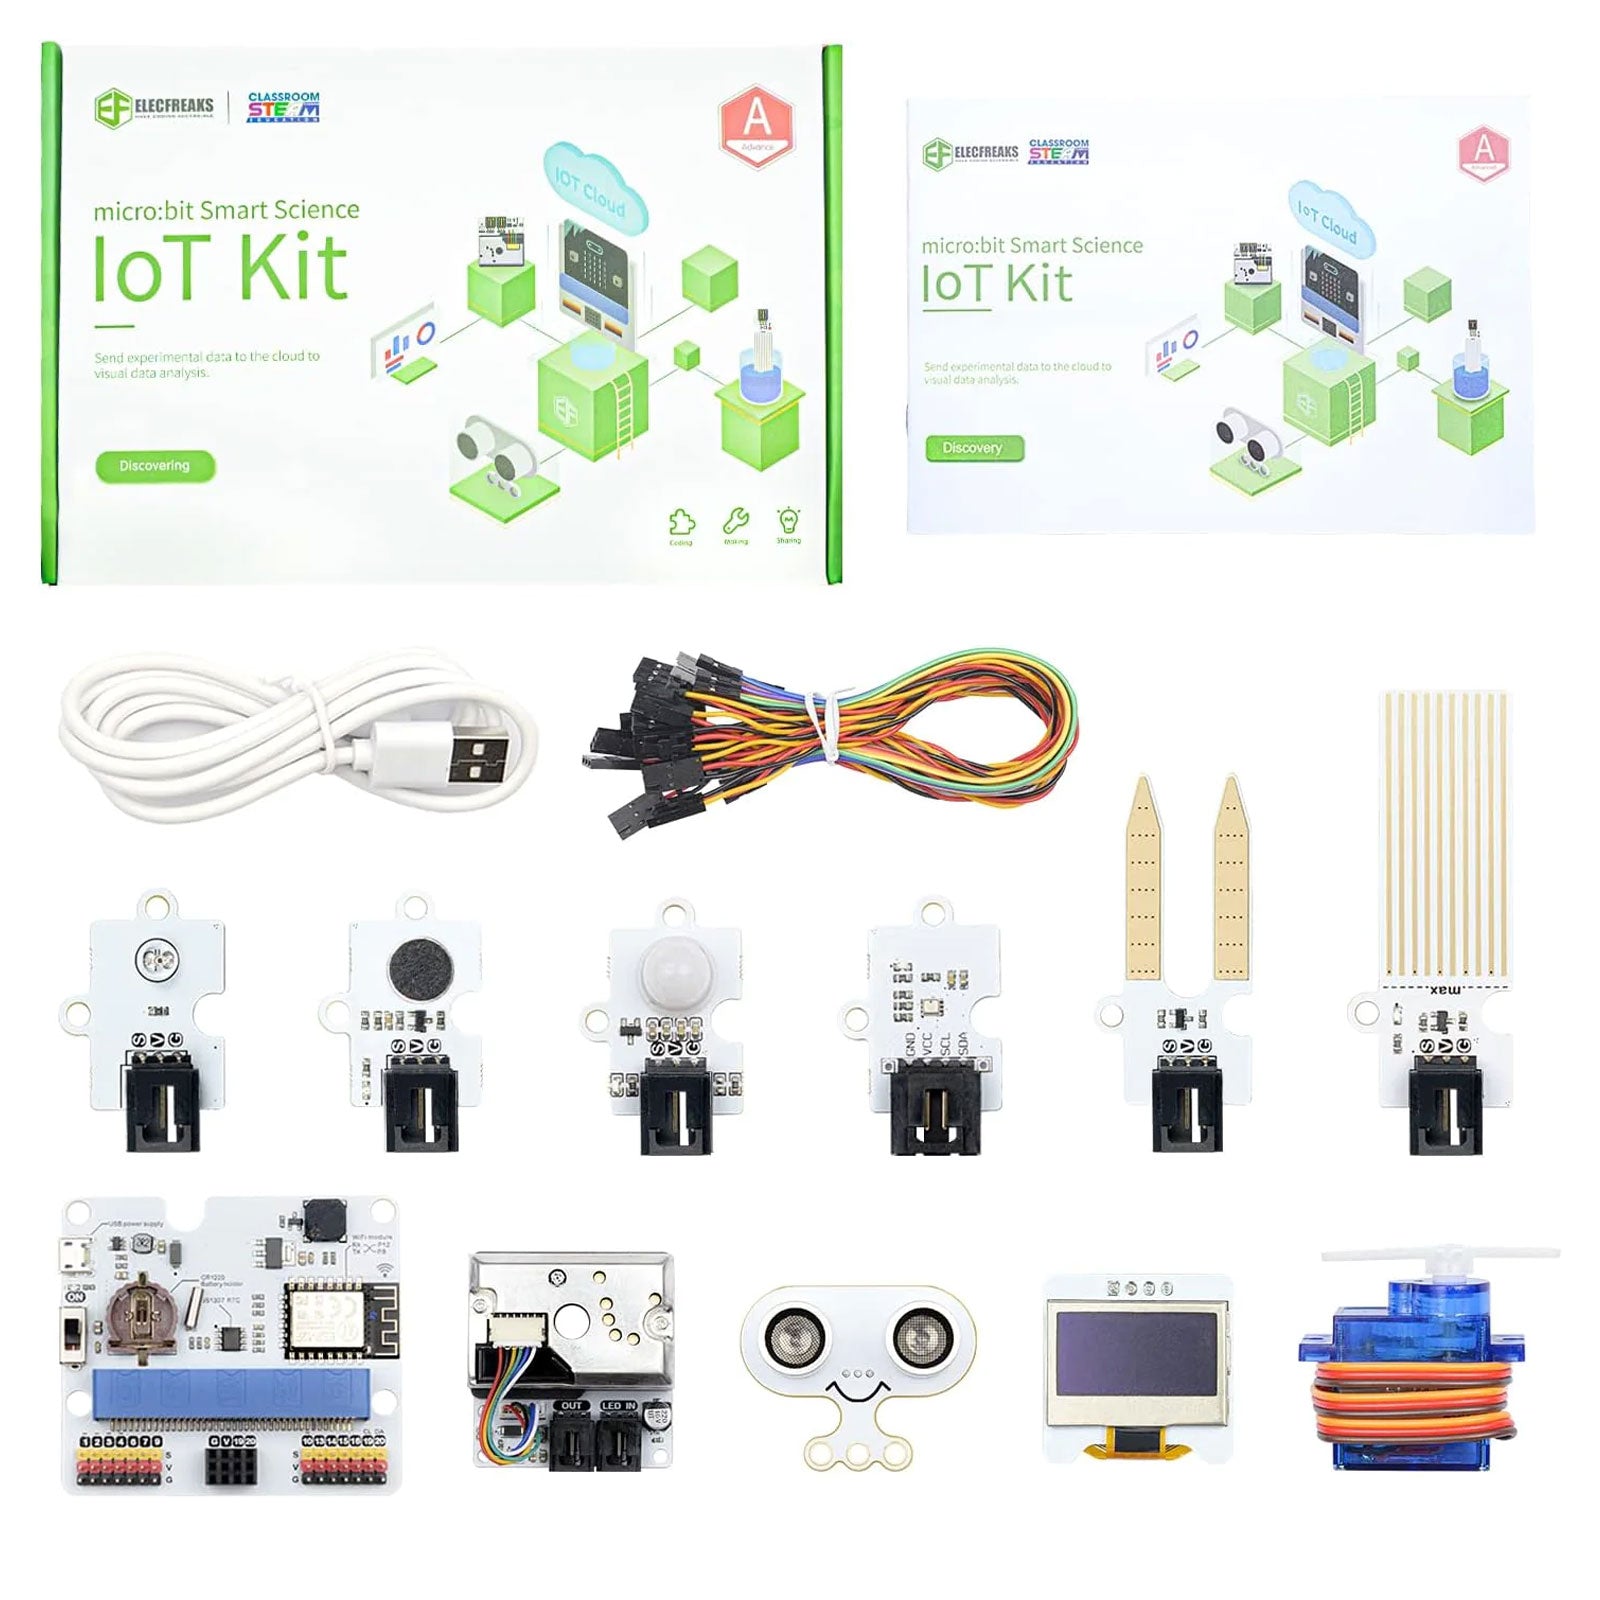 ELECFREAKS micro:bit Smart Science IOT Kit Includes Range Of Sensors And Modules (Without micro:bit Board)